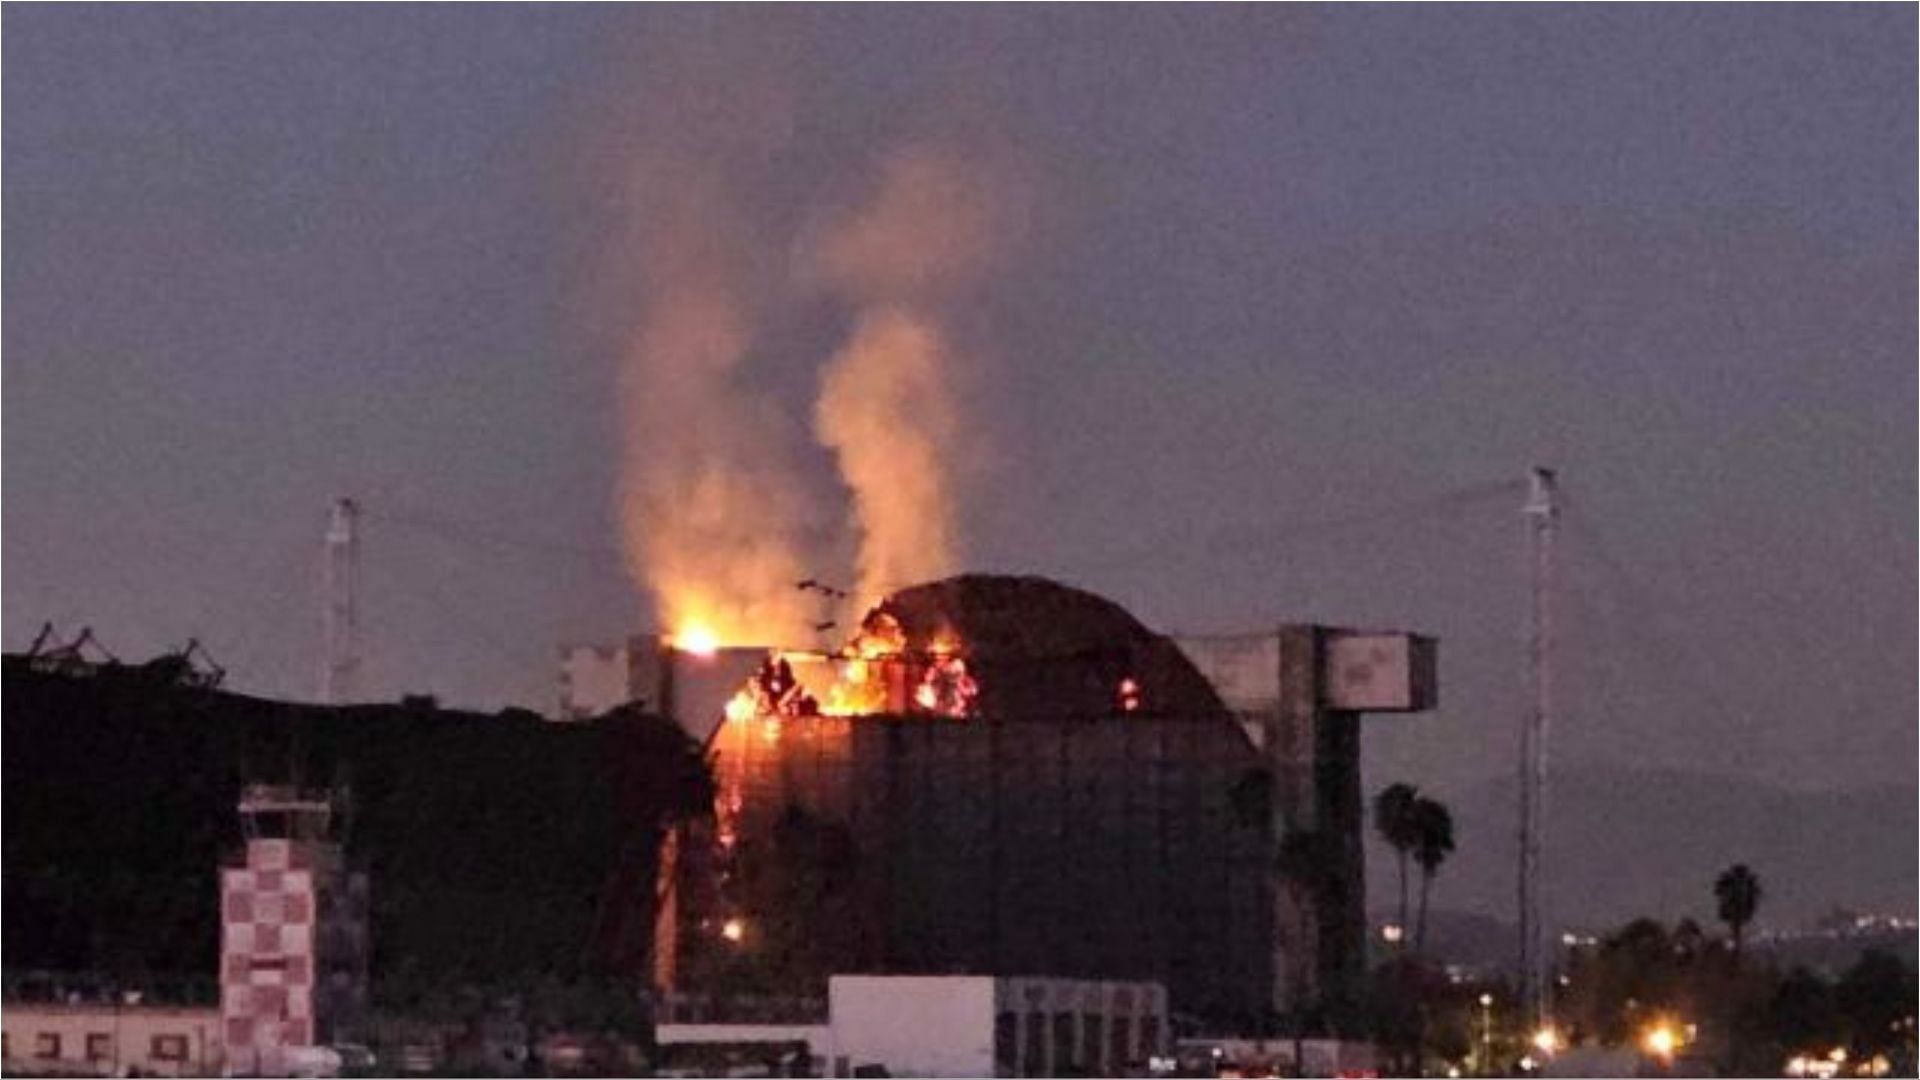 Tustin Hangar was destroyed in a fire incident which started on Tuesday (Image via MayorofIrvine/X)